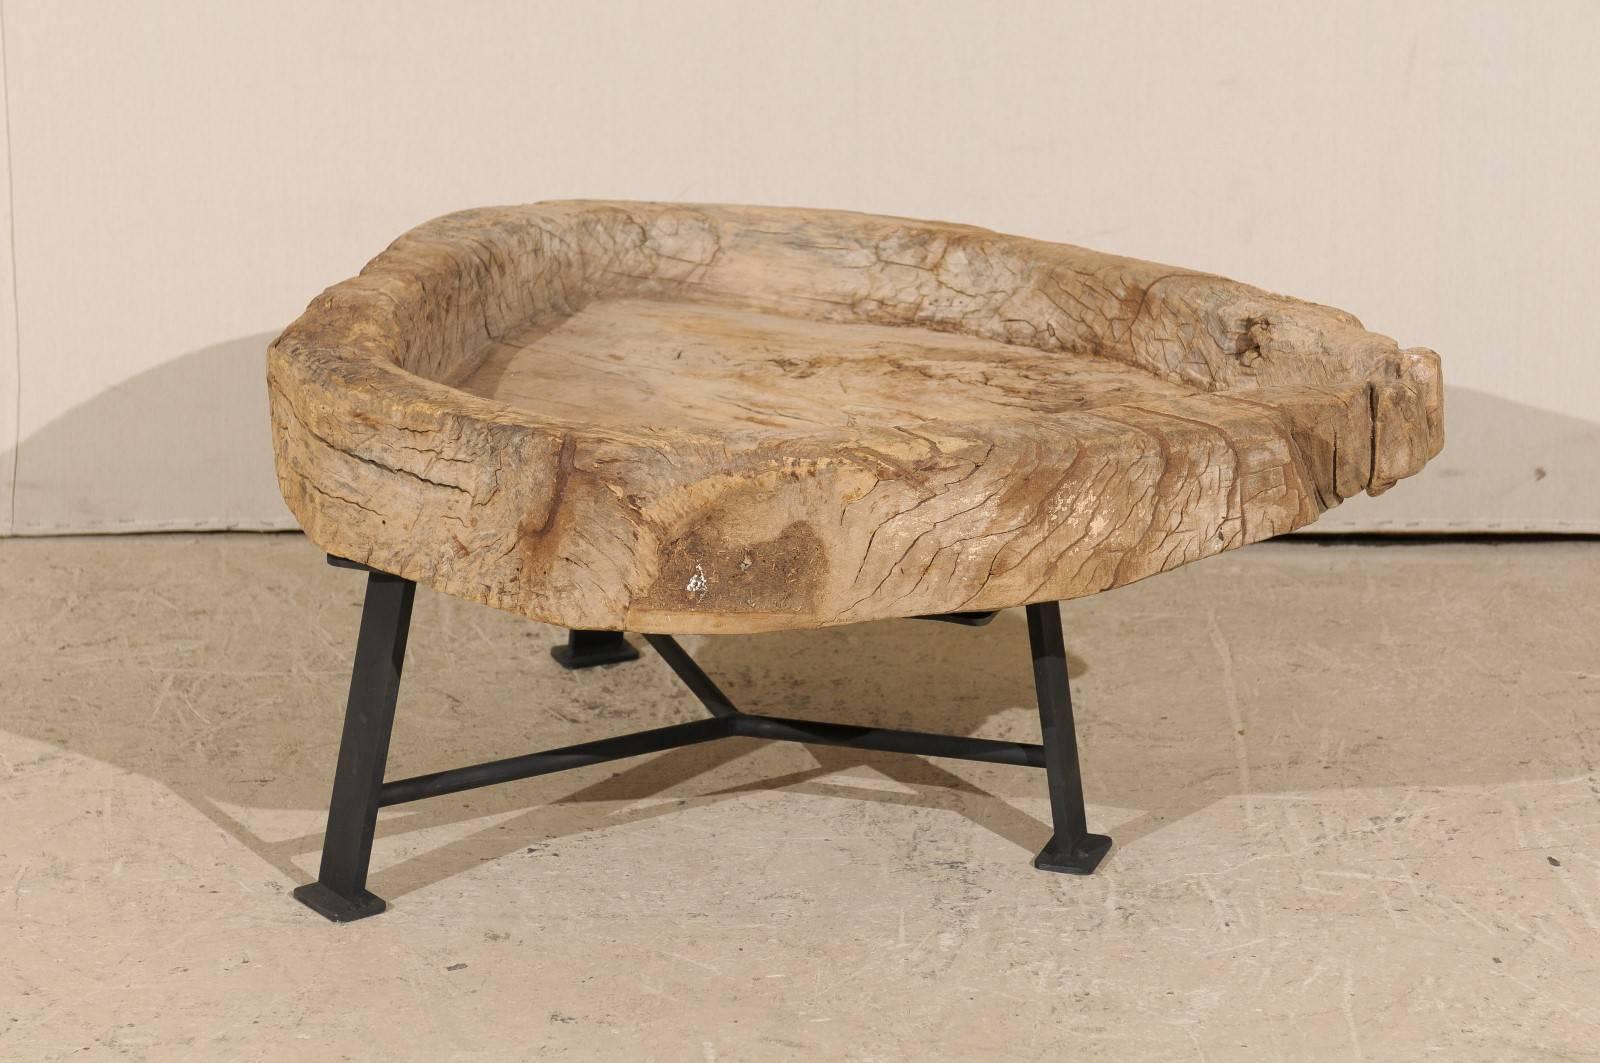 Metal Guatemalan Rustic Natural Interestingly Shaped Coffee Table, Late 19th Century